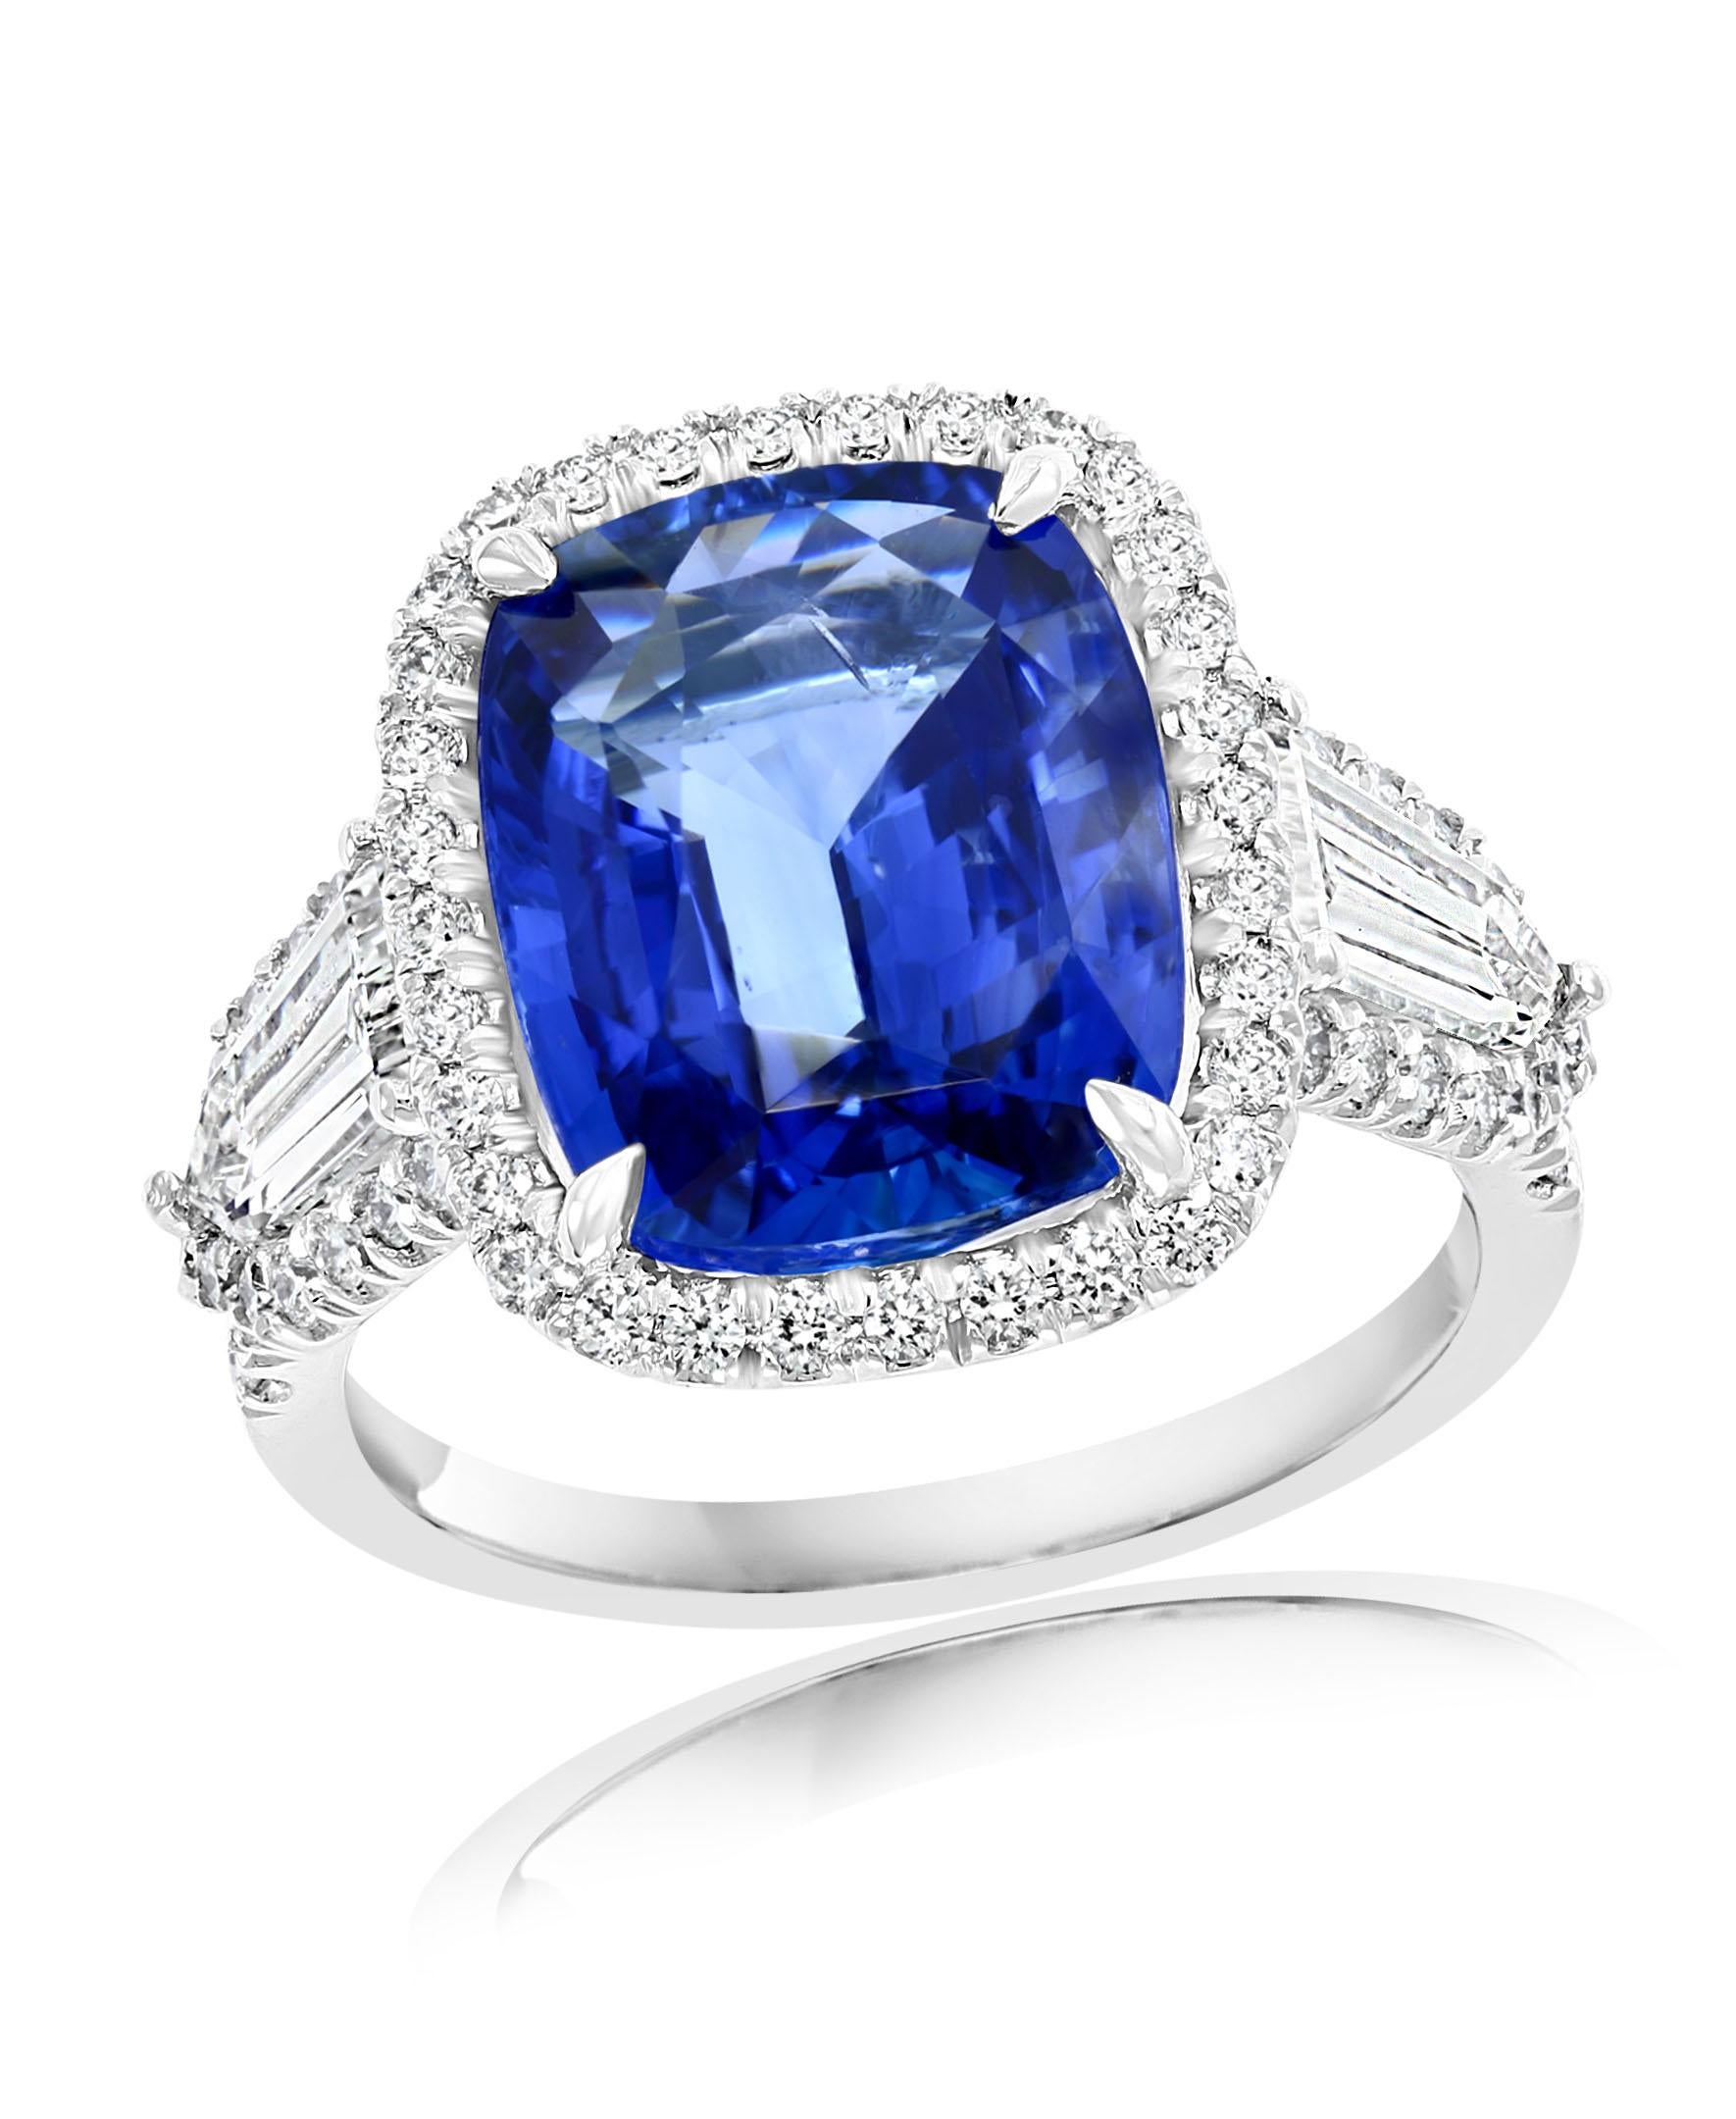 Features a beautiful and rare 7.51 cushion-cut blue sapphire. Flanking the center gemstone are 2 tapered baguette diamonds on either side weighing 1.01 carats. A single row of round brilliant diamonds accent the center and side stones. The total